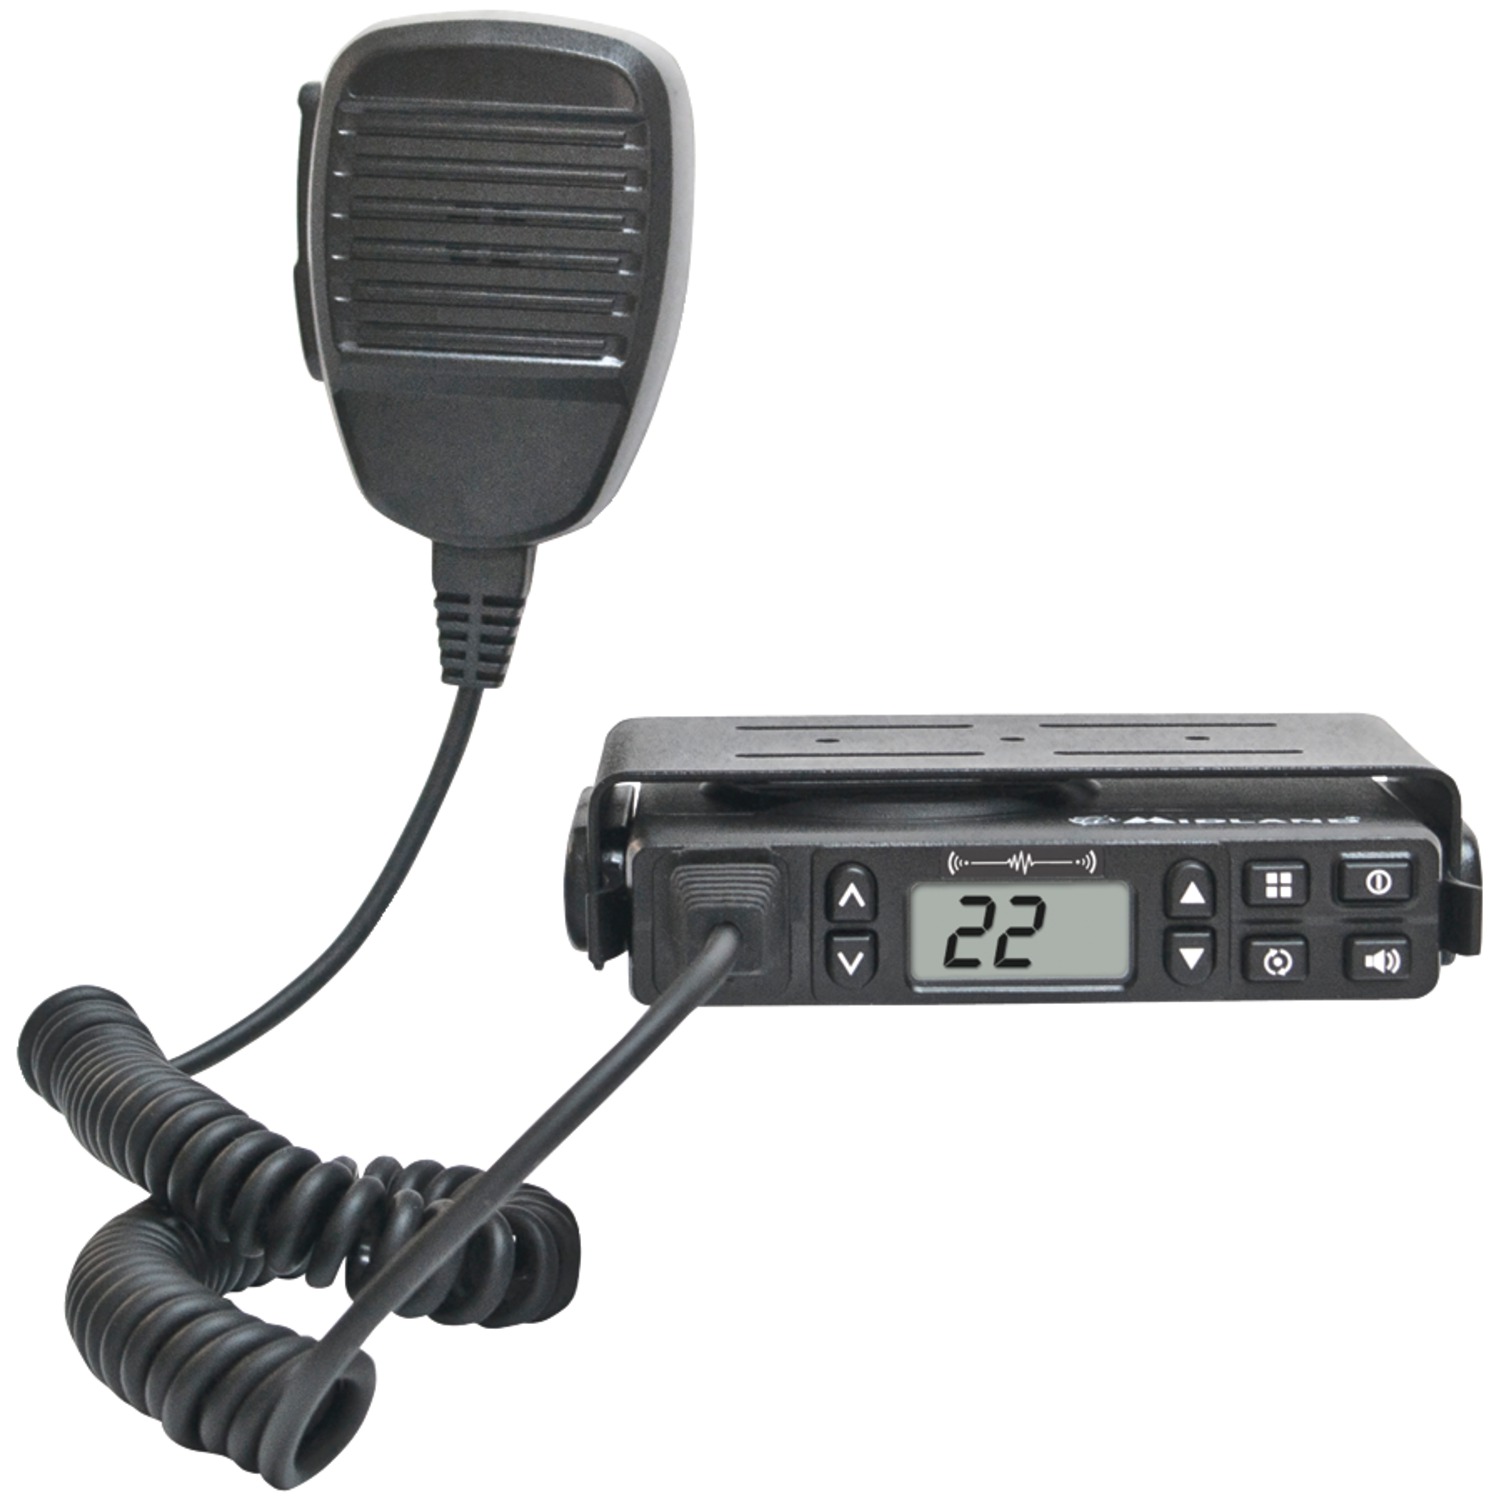 Midland 843631100479 microMOBILE Fixed-Mount GMRS 2-Way Radio with Magnetic Mount Antenna & pair of Midland 18-Mile GMRS Radios - image 2 of 3